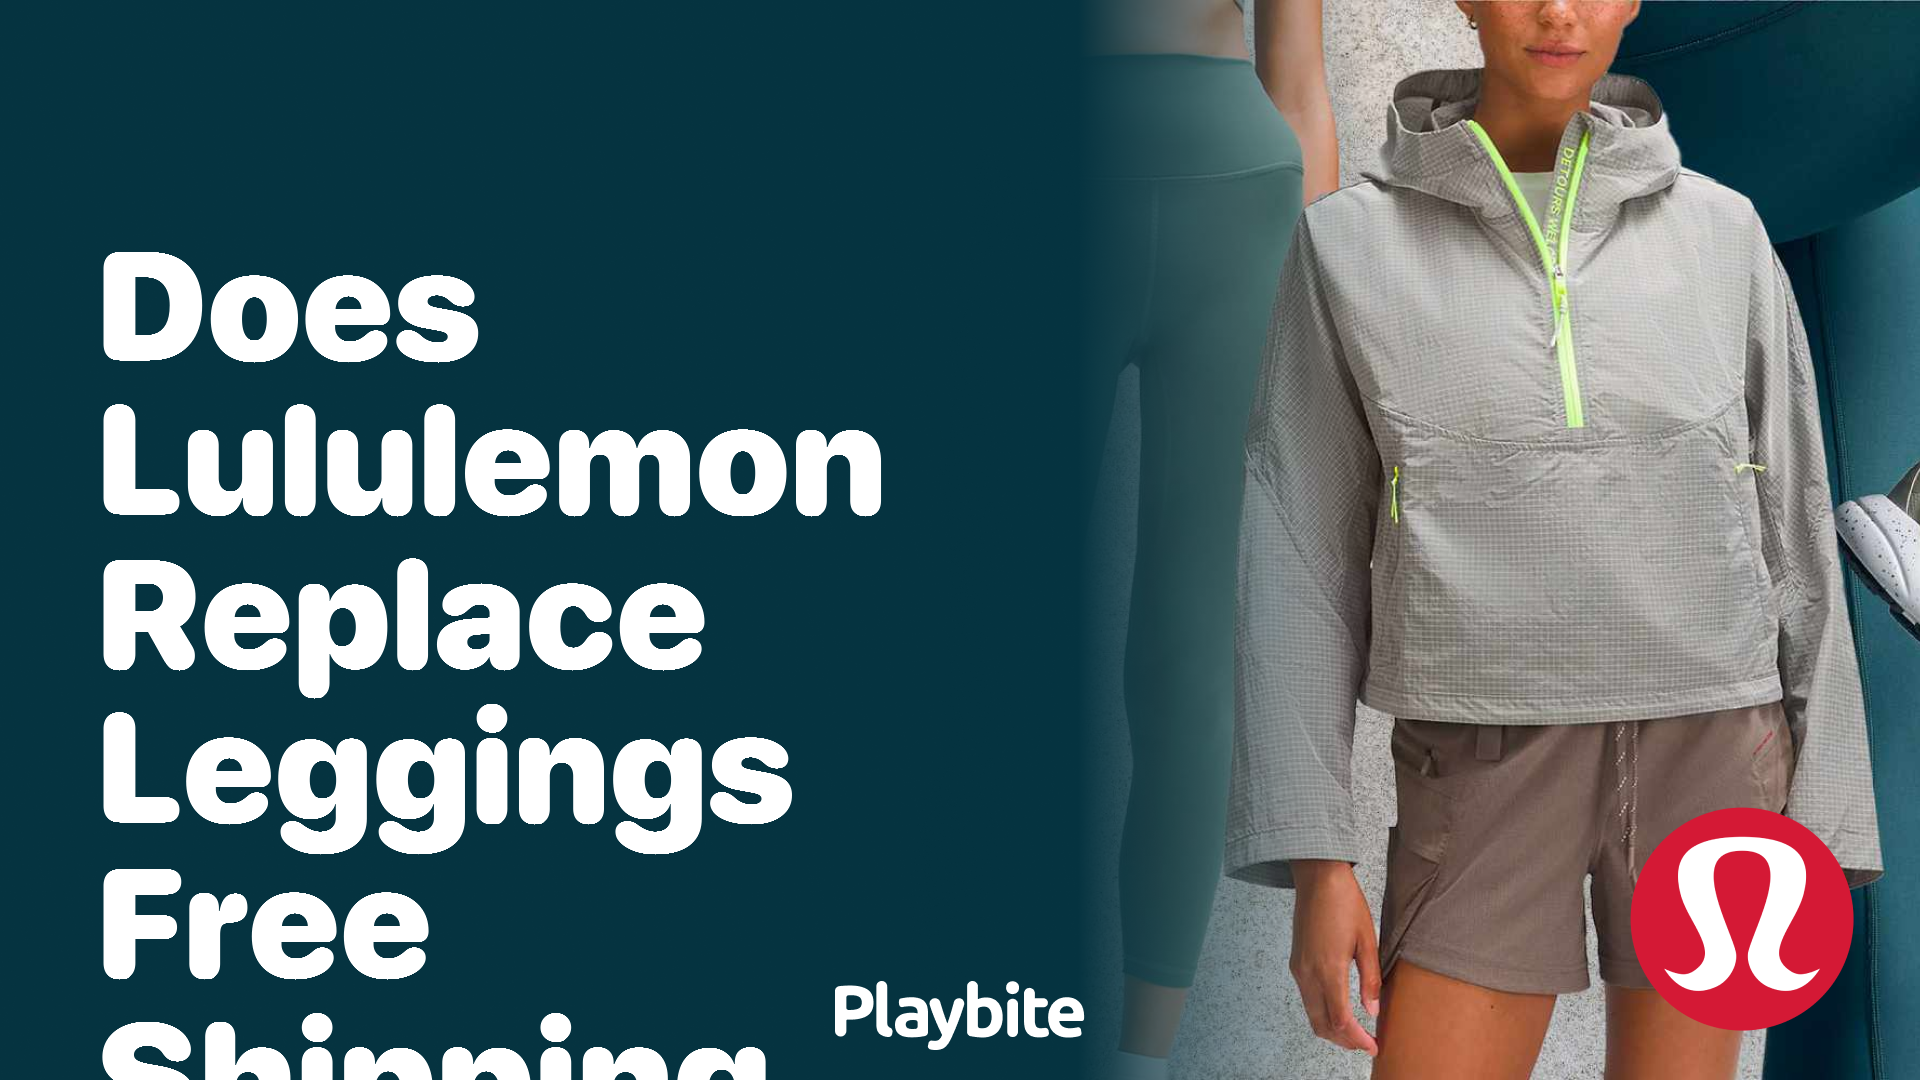 Does Lululemon Replace Leggings for Free? - Playbite